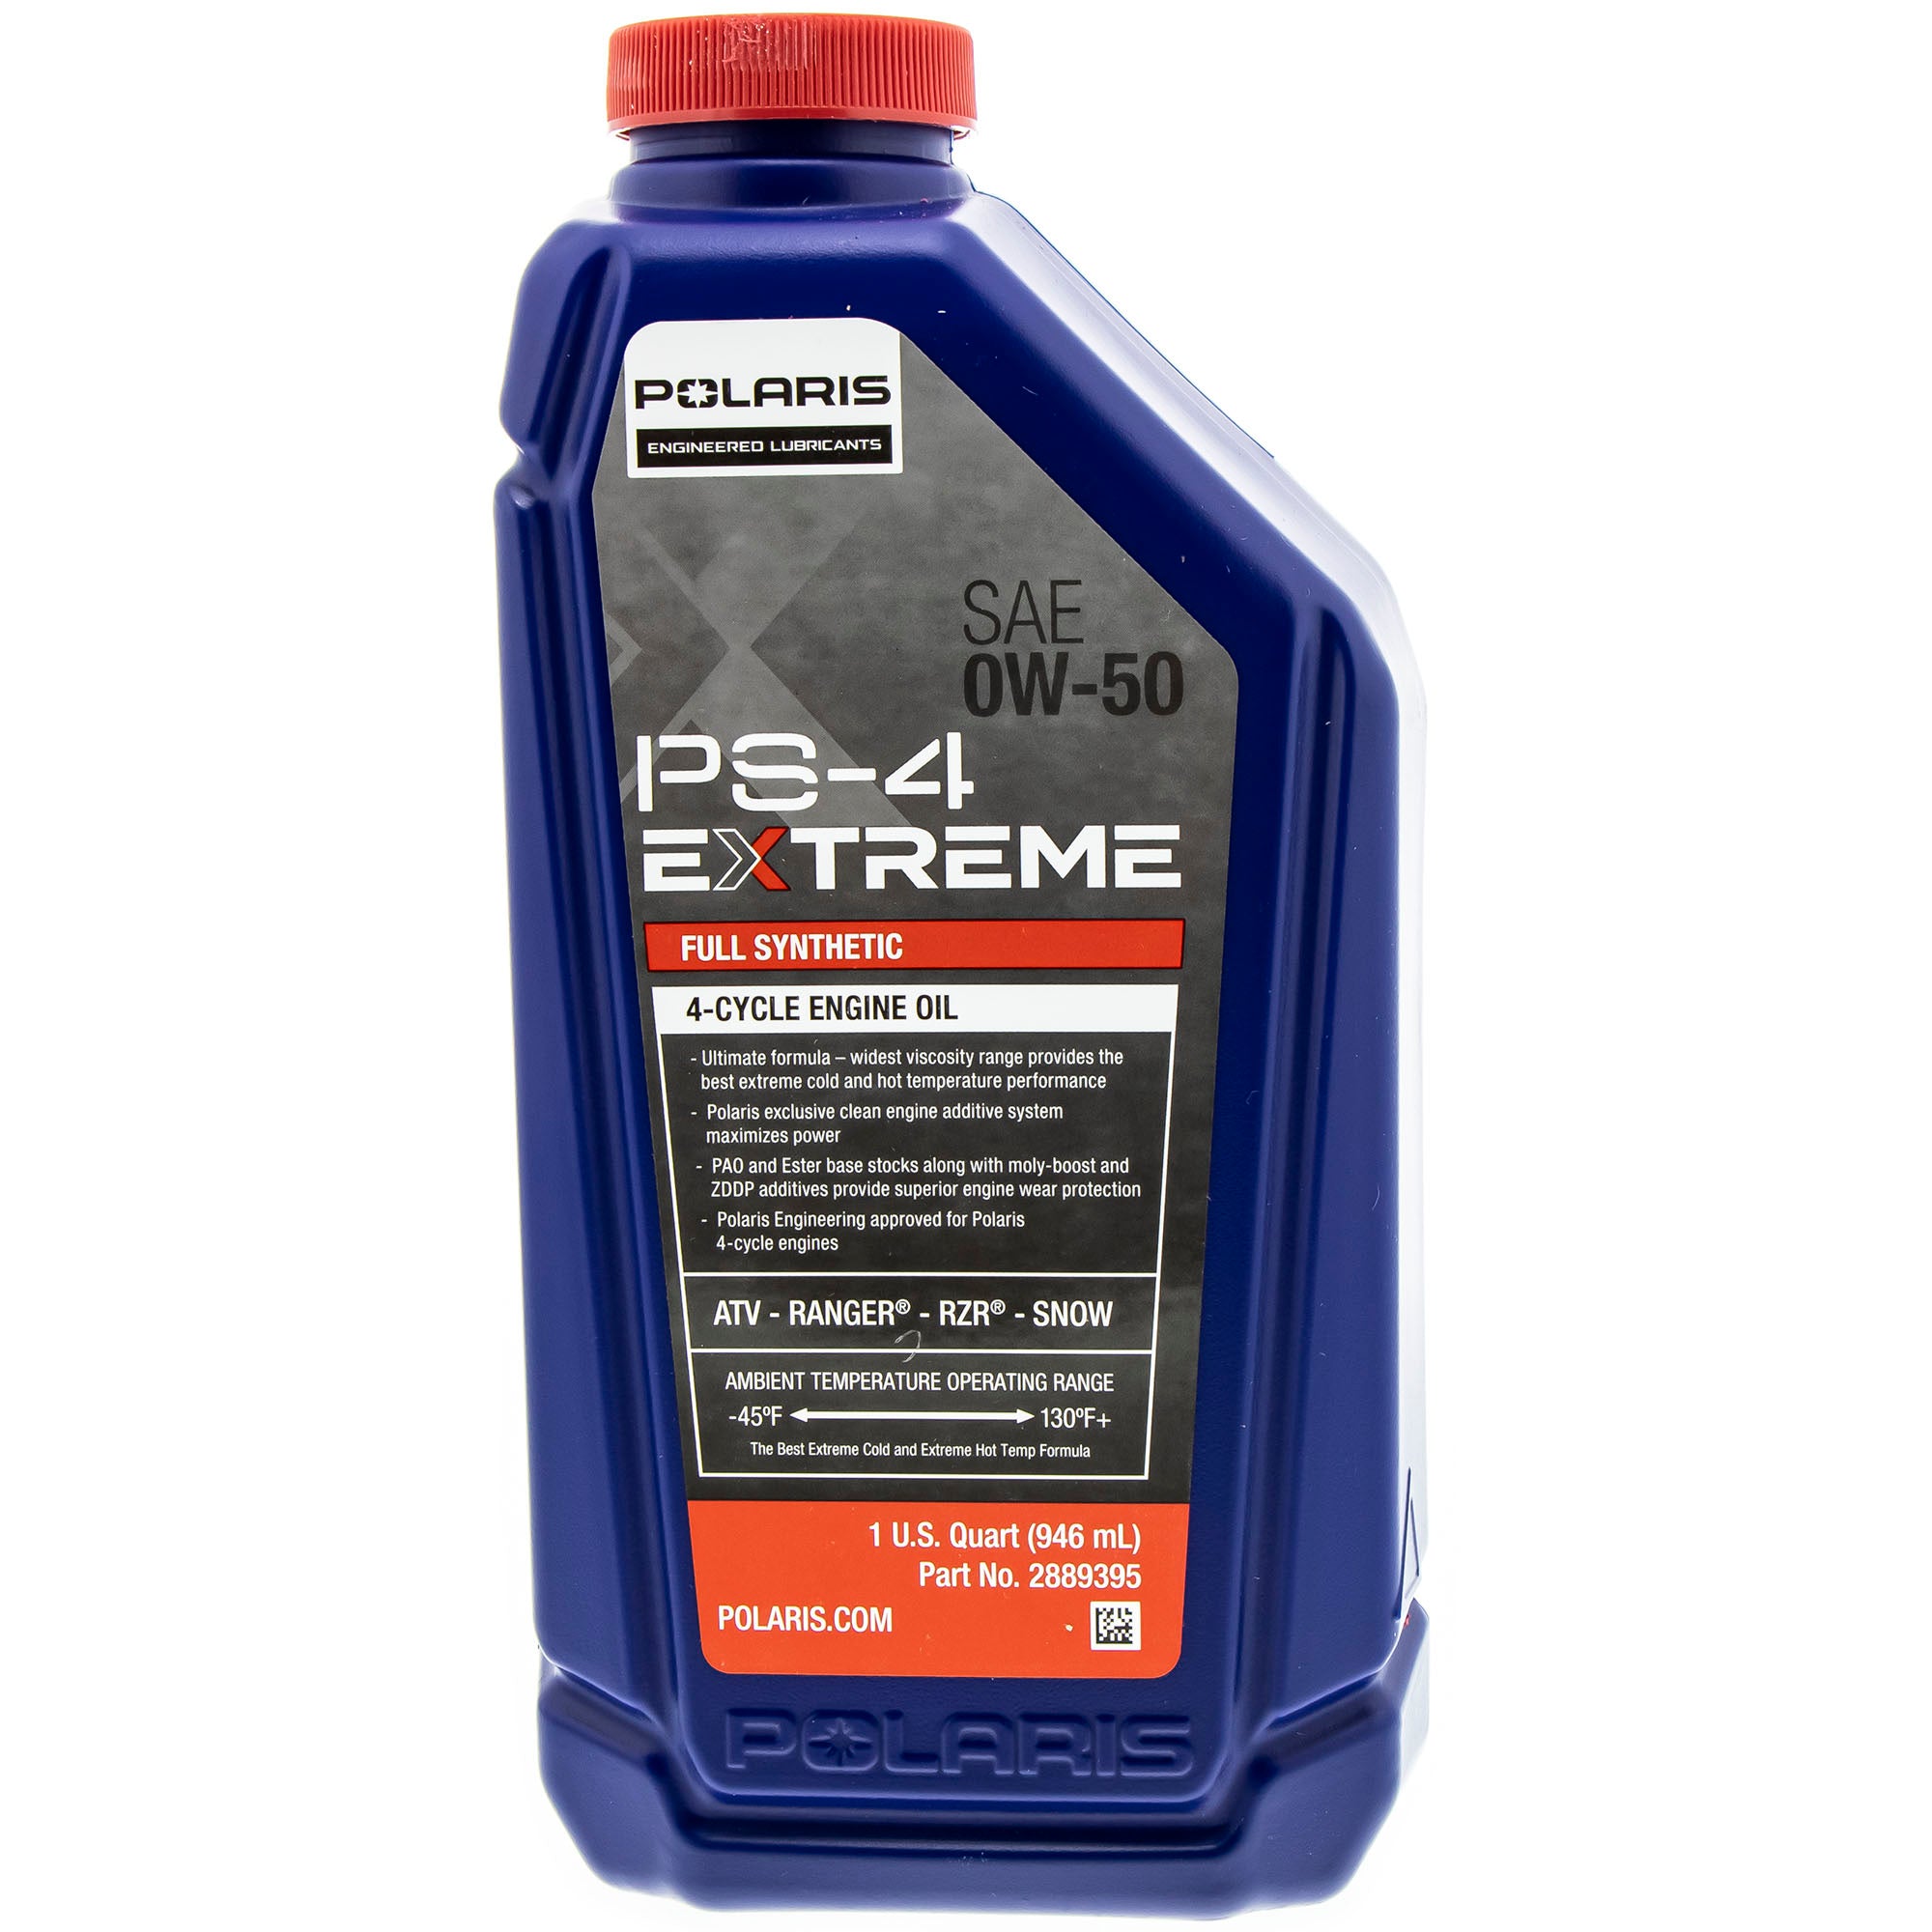 Polaris FKFSK20029 PS-4 Extreme Full Service Oil Change Kit Filter AGL Angle Drive Fluid